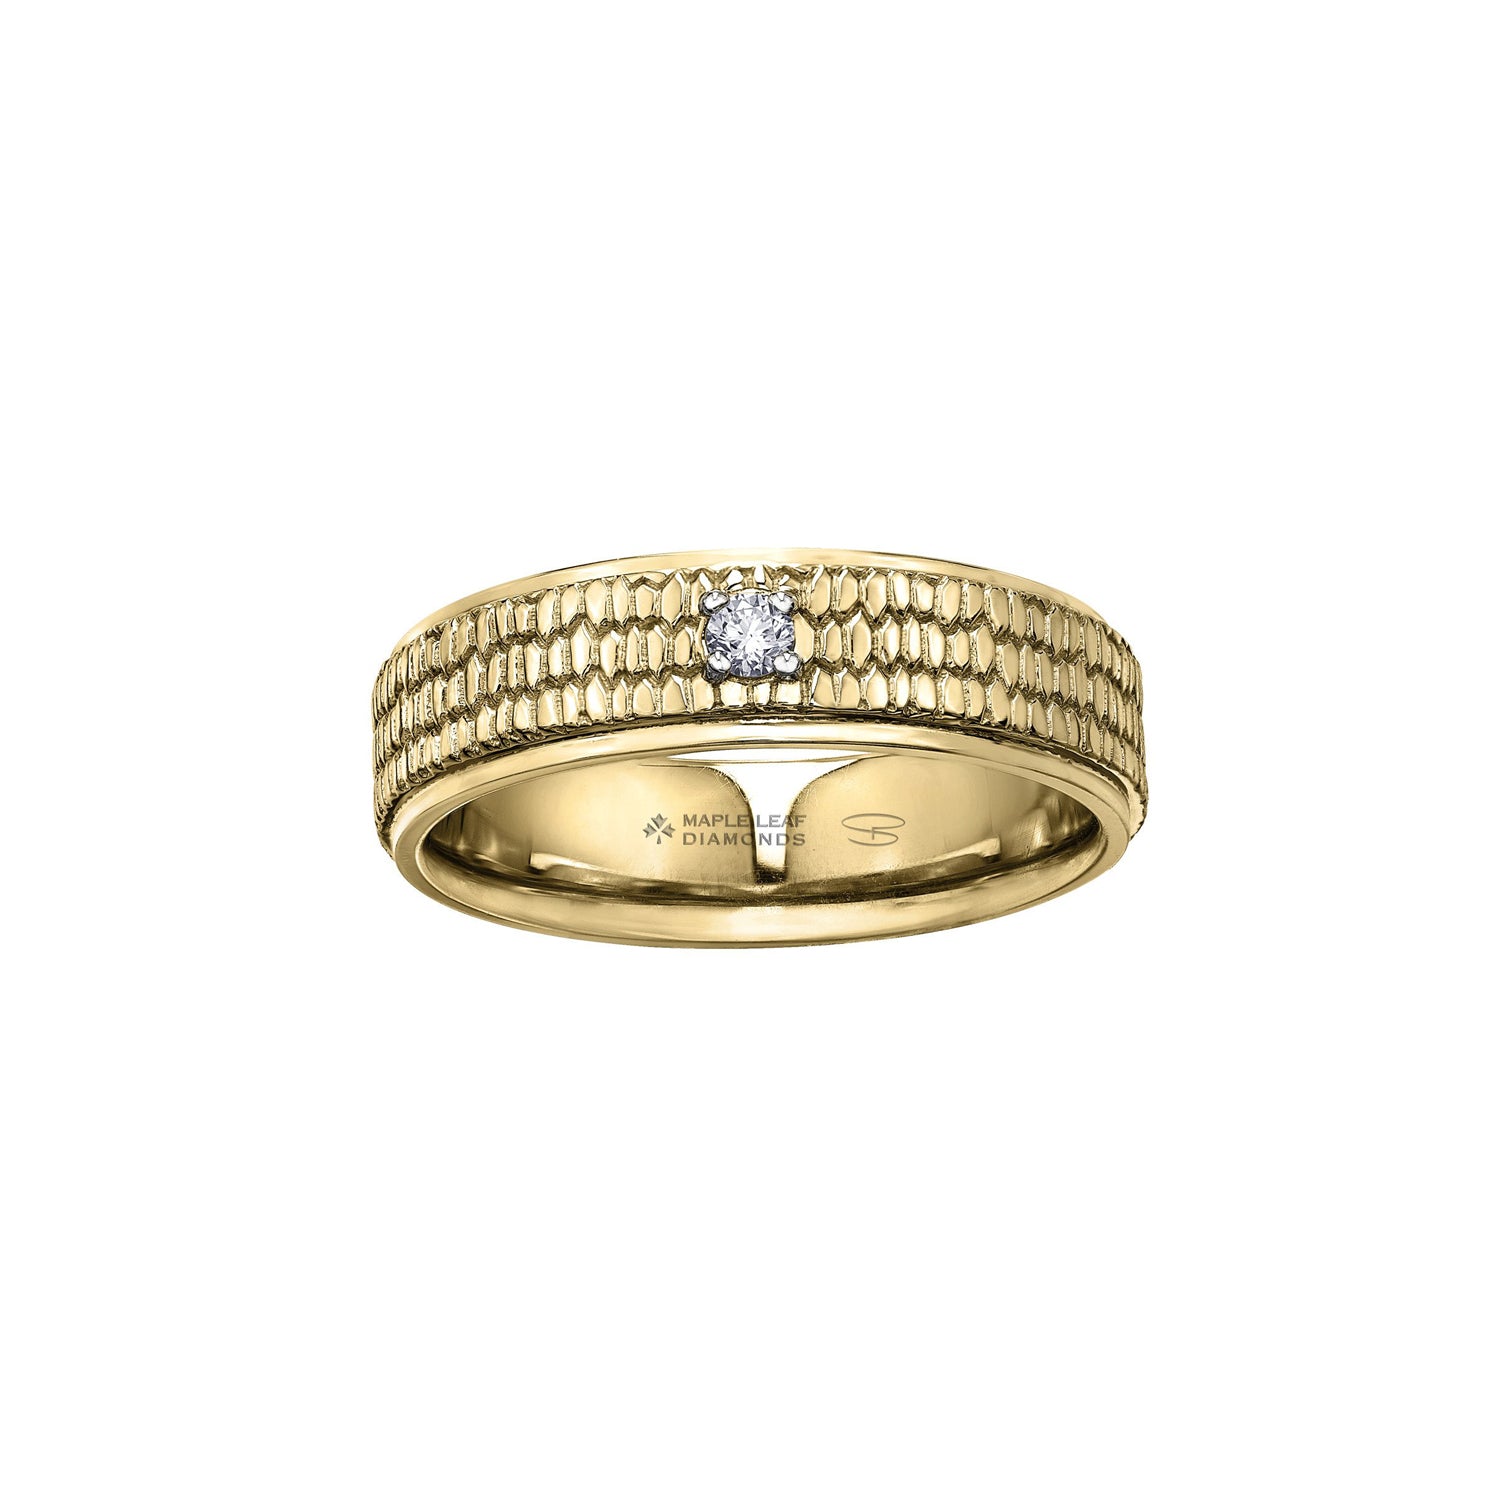 Crafted in yellow 14kt Certified Canadian Gold, this men’s band features a pavé pattern similar to a beaver’s tail set with a round-brilliant cut Canadian centre diamond.